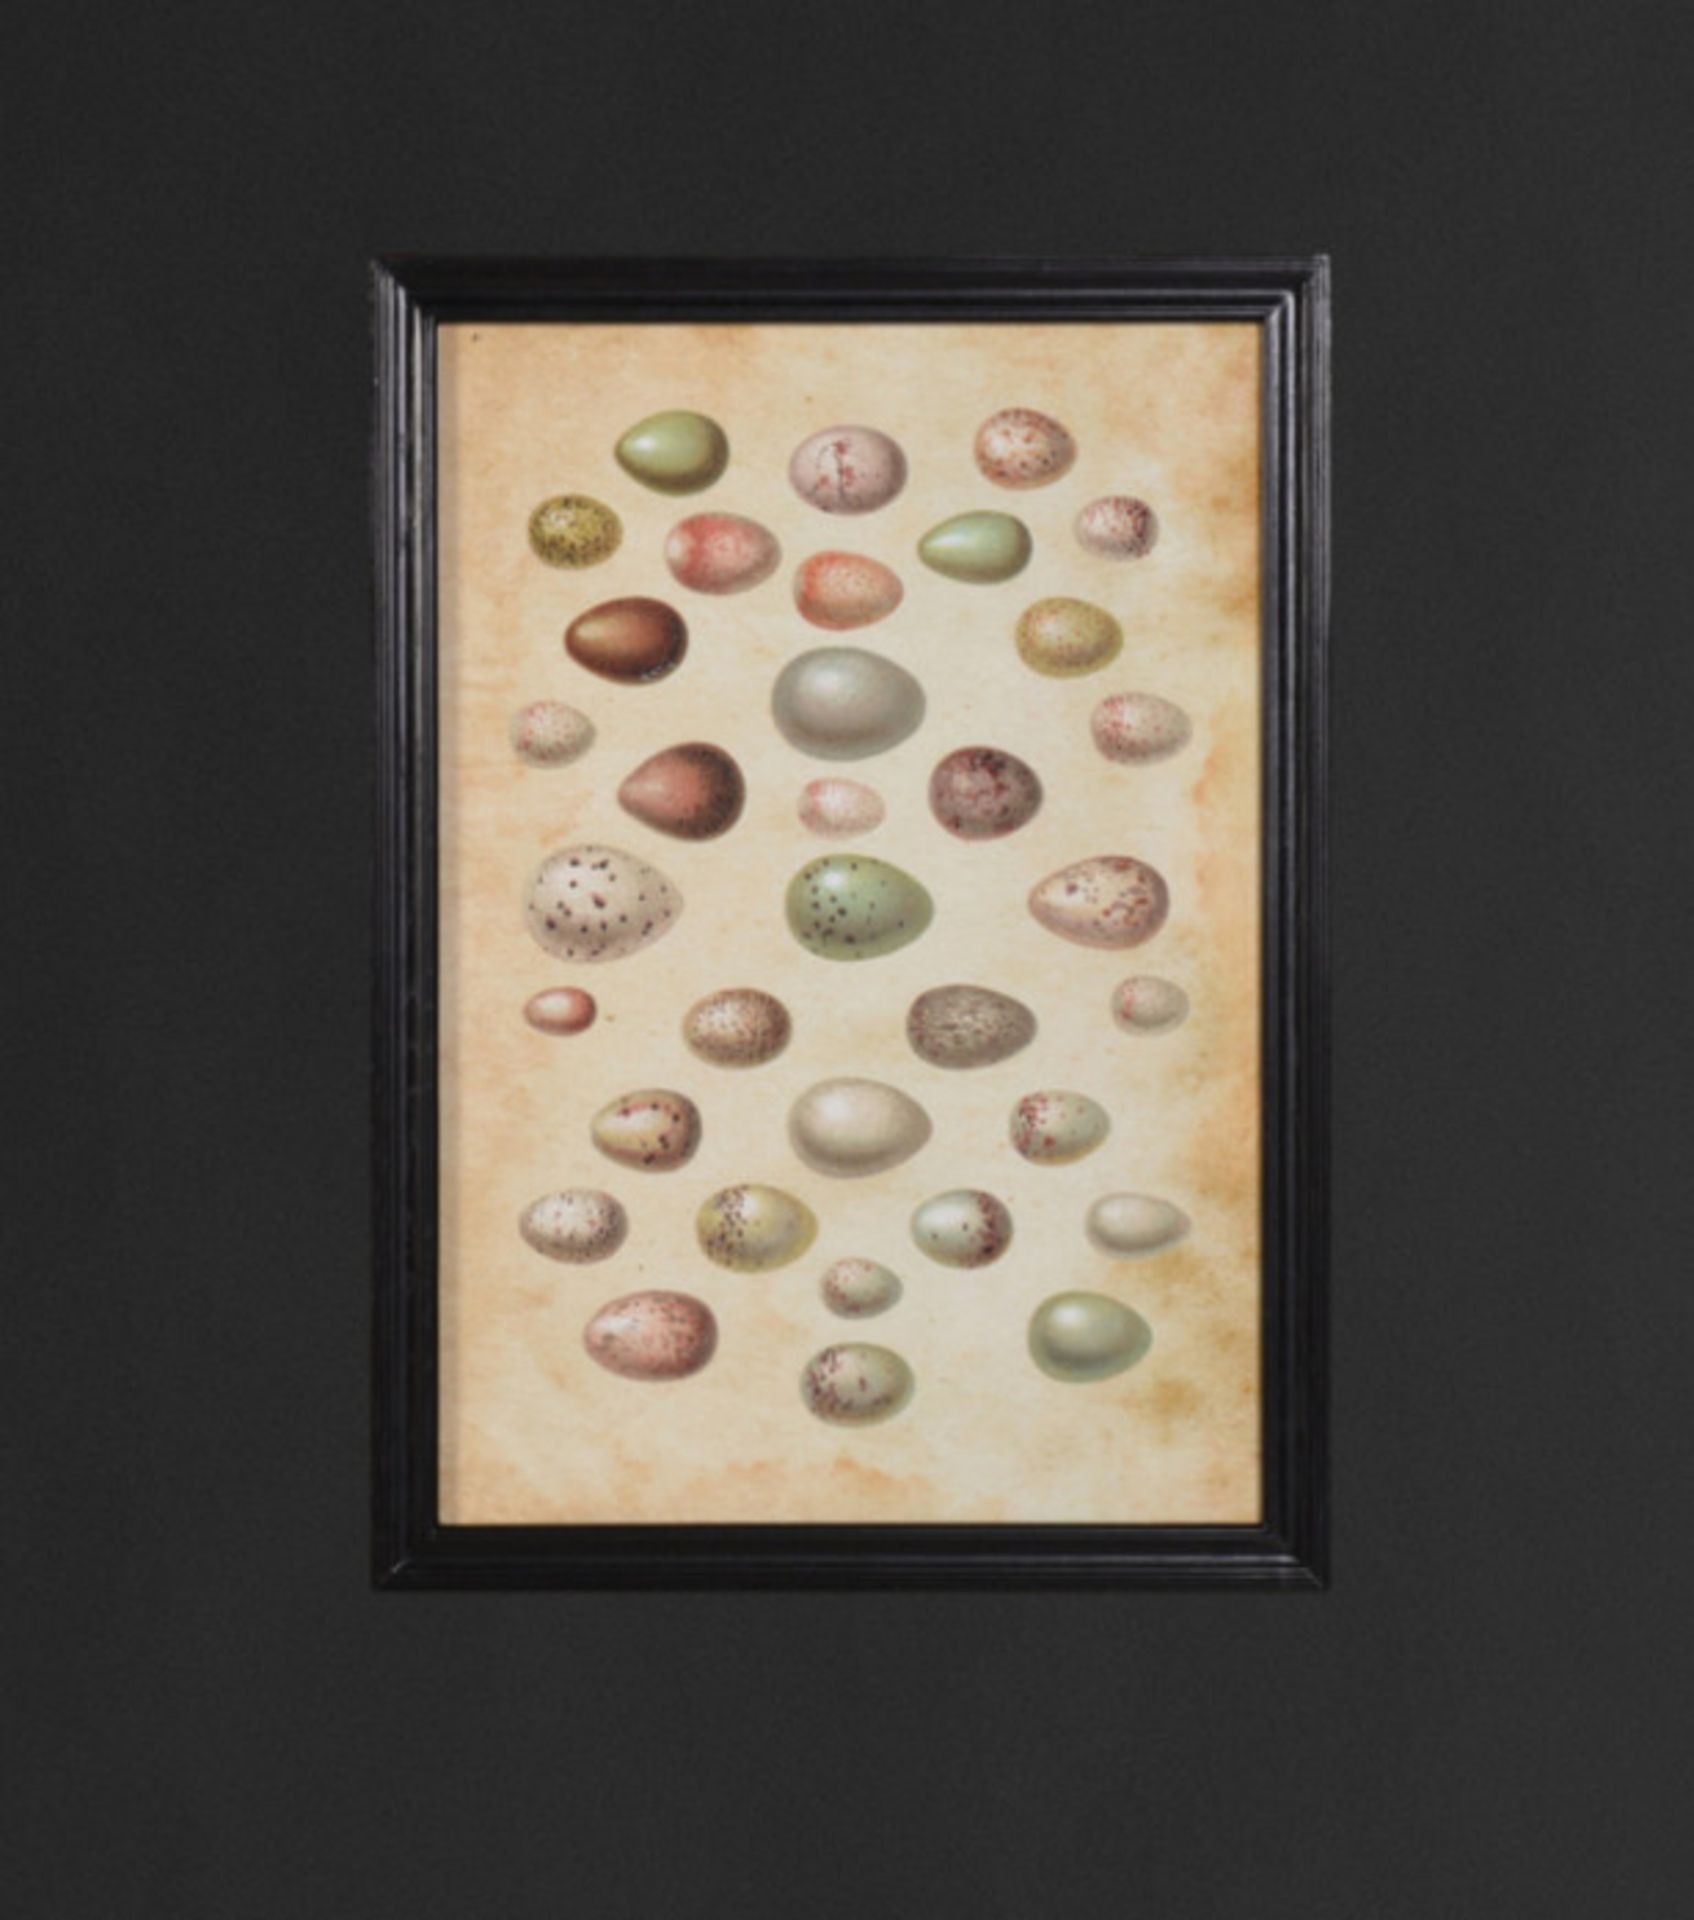 Framed Wall Art Animal Eggs - This Piece Is Printed On Museum Quality Archival Paper, Framed In